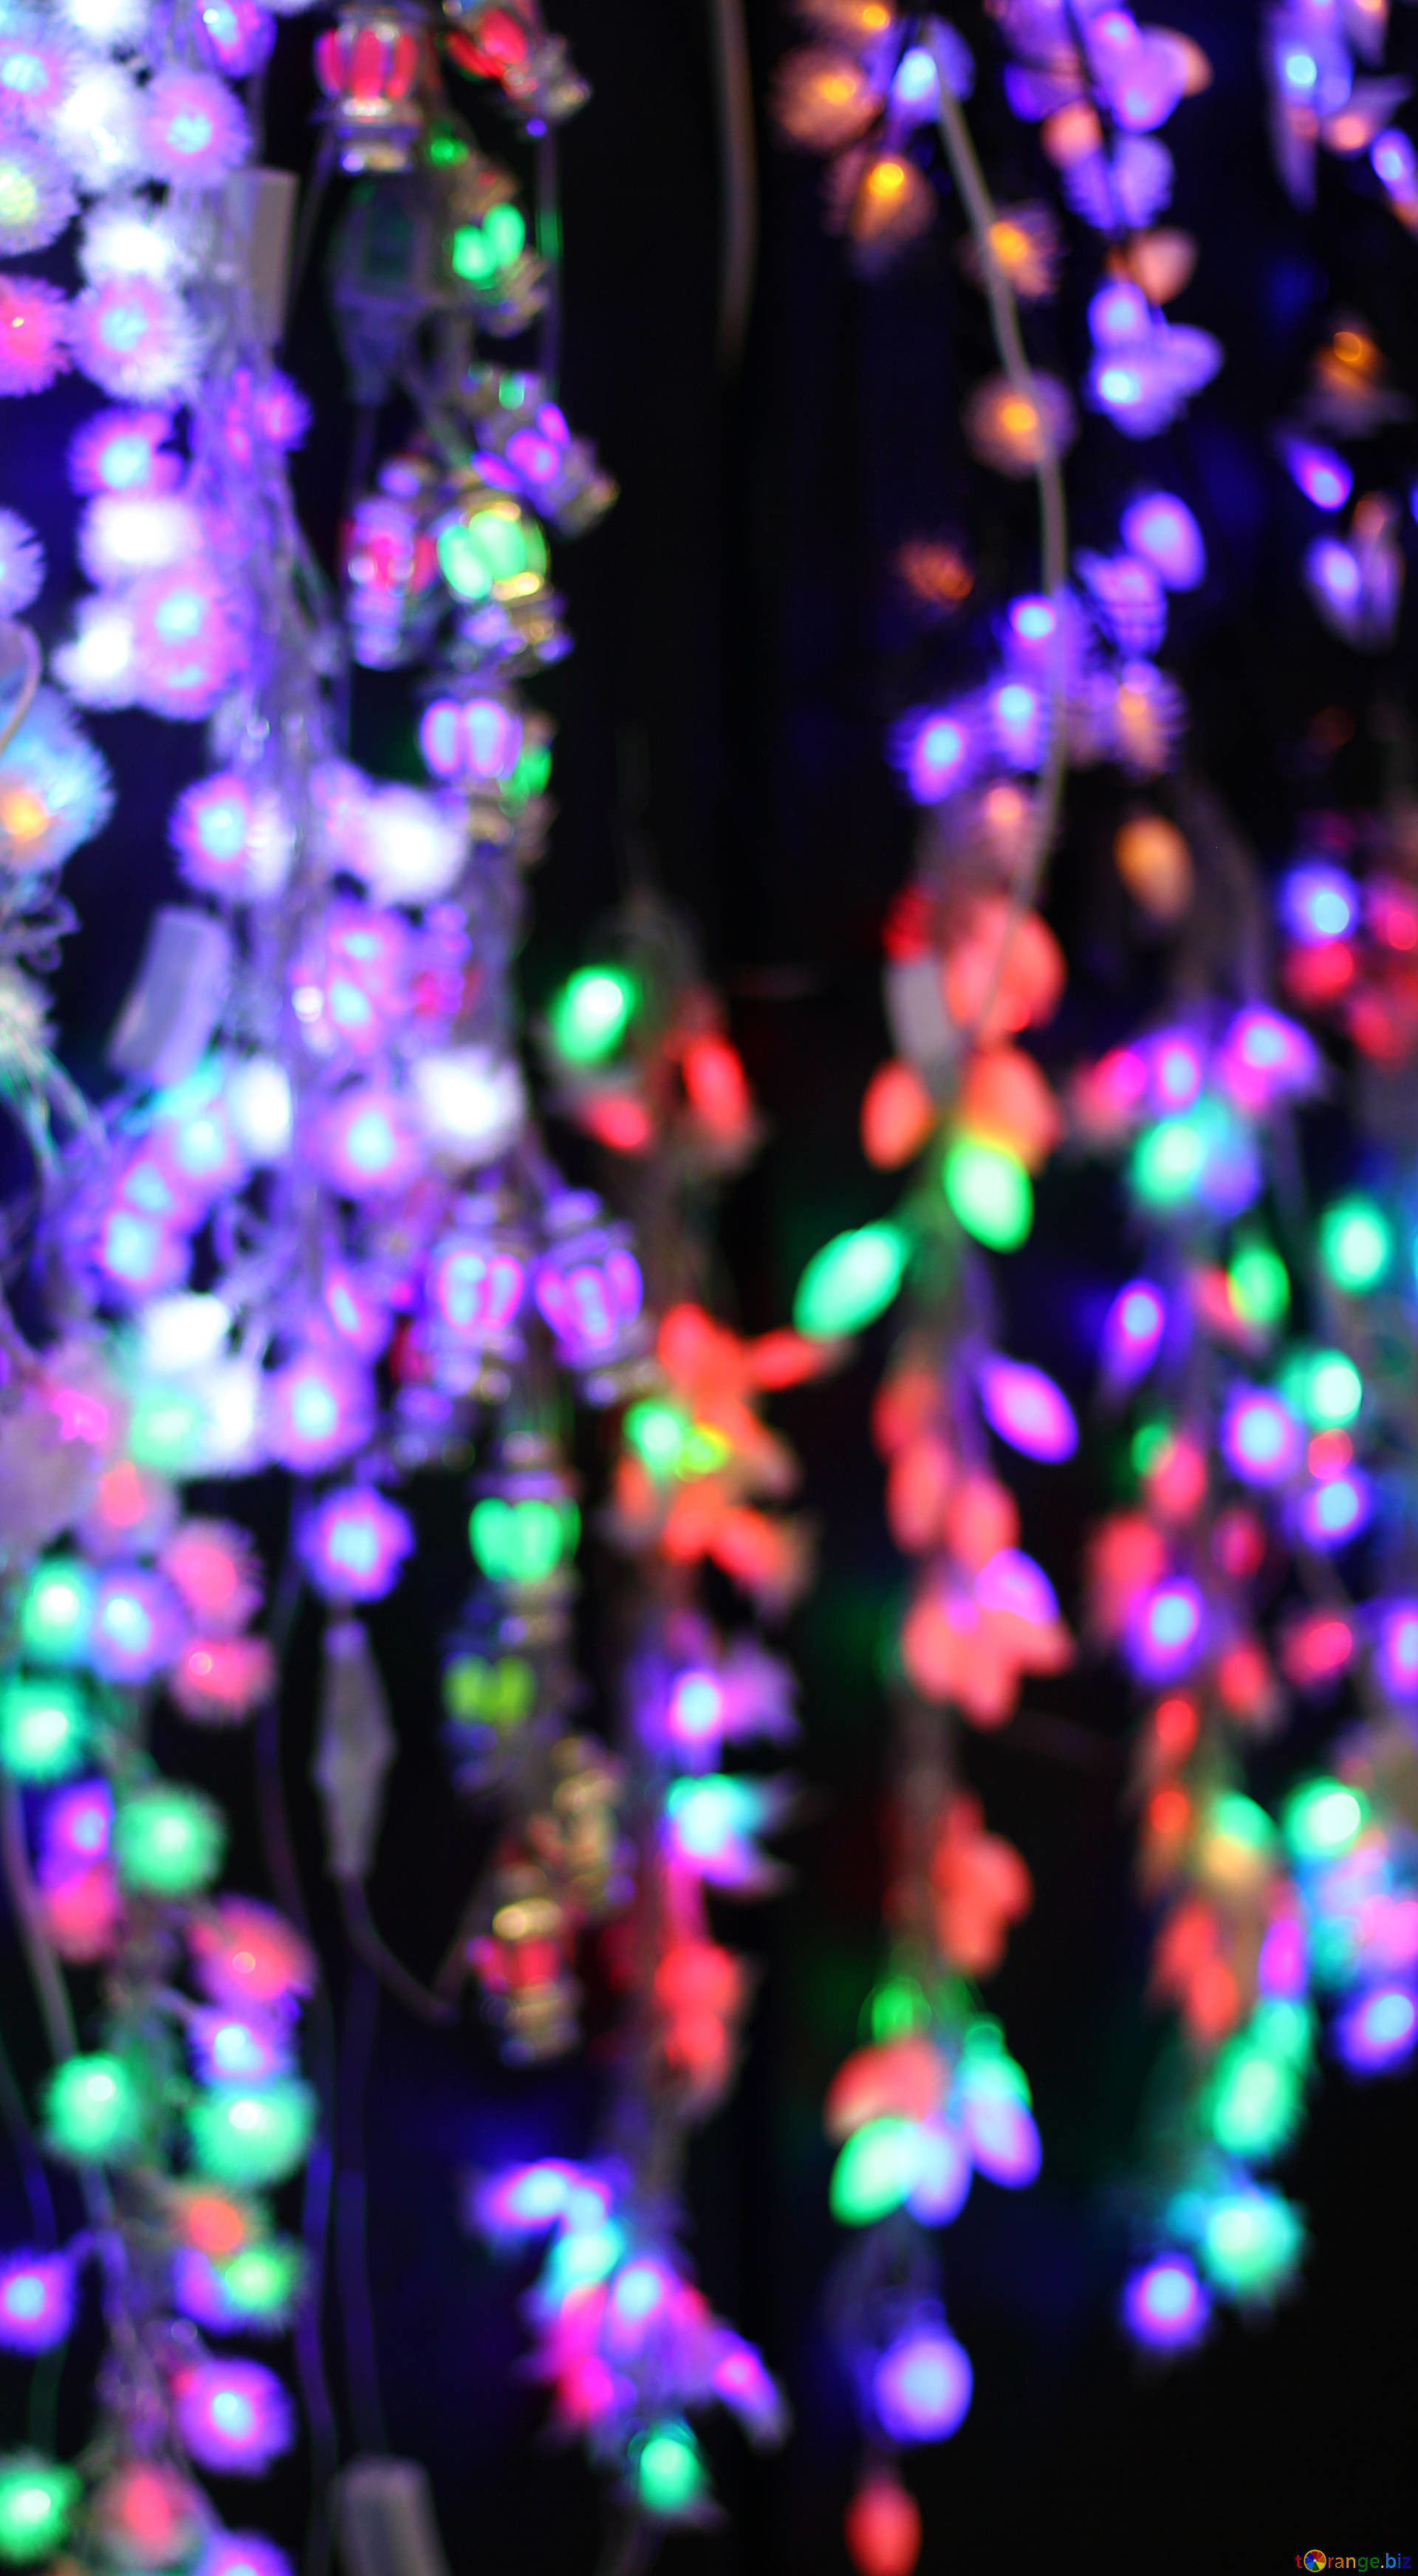 1920x3489 Download free image Colored lights Christmas light background in HD  wallpaper size 1920px